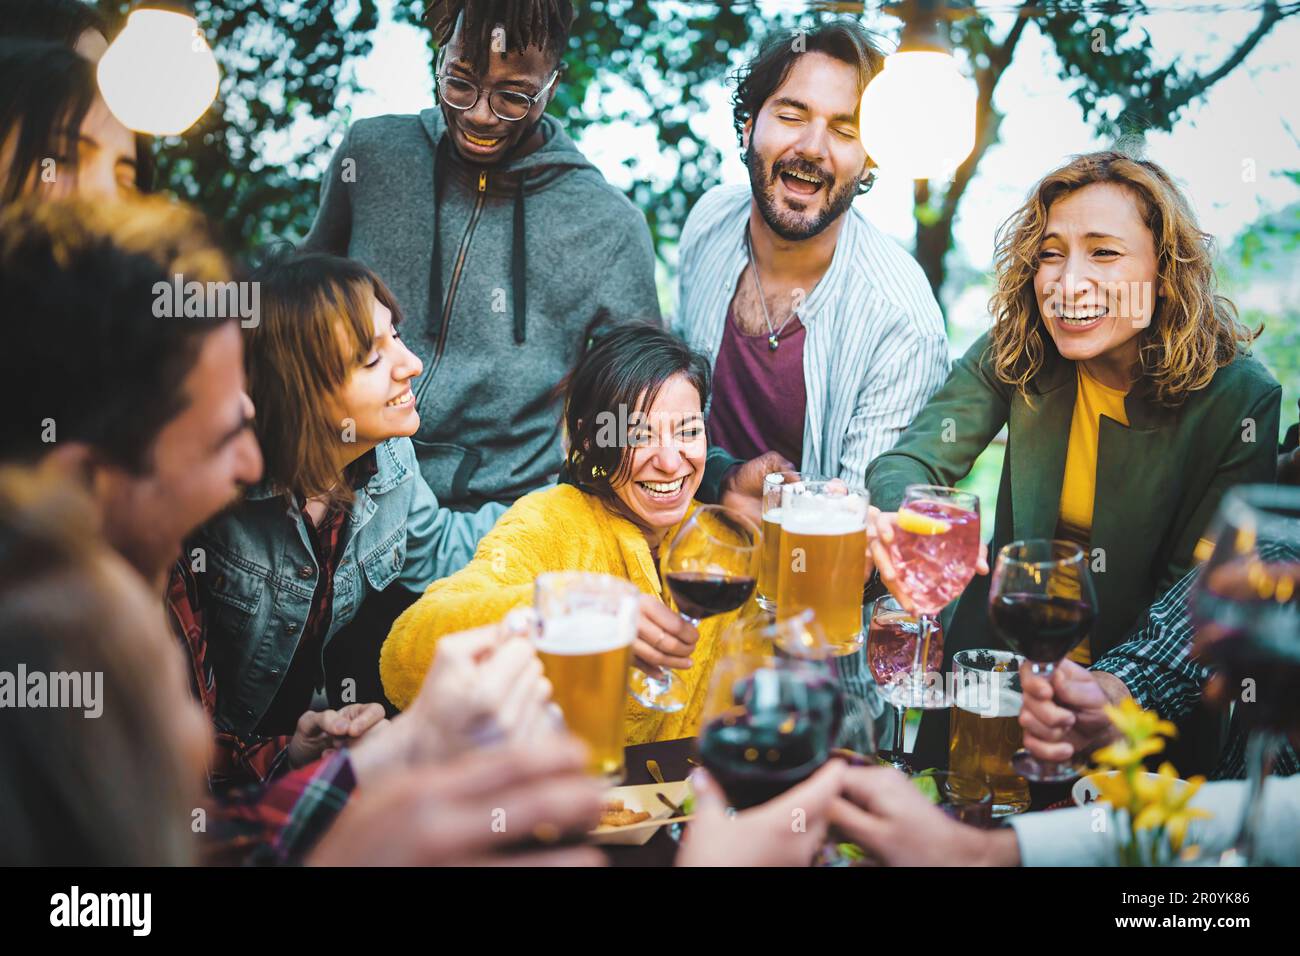 A happy brunette woman holding a glass of red wine is surrounded by her diverse friends, who are raising their own glasses of beer, wine, or cocktails Stock Photo